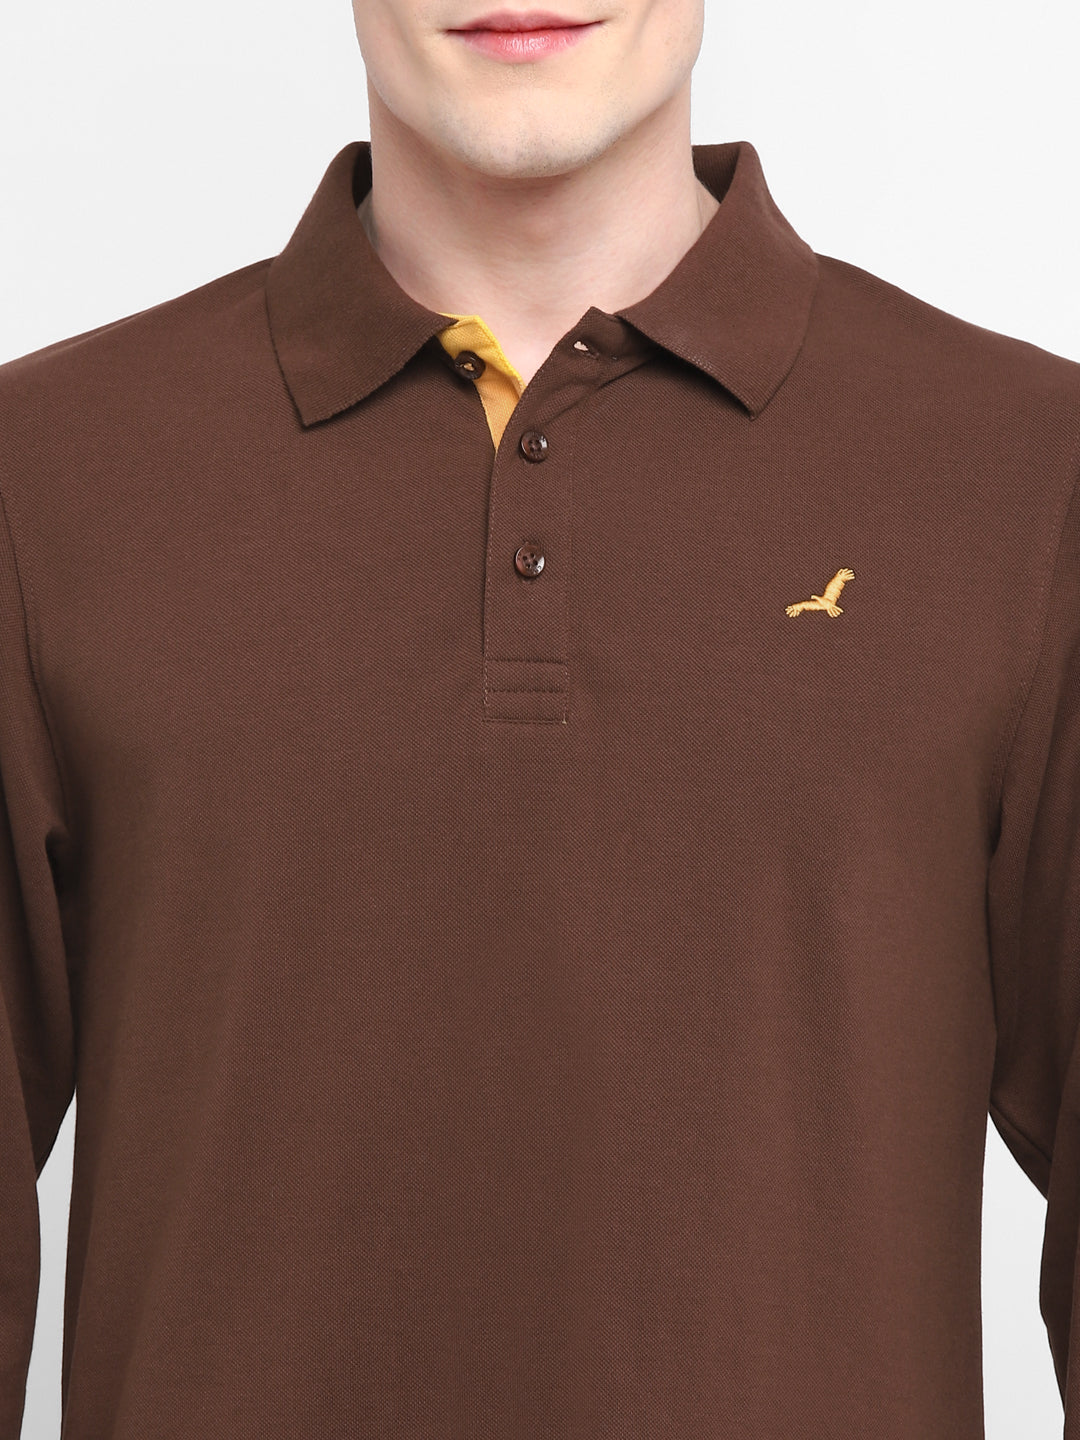 Full Sleeves Polo Collar T-Shirt for Men - Dark Brown Cotton-Poly Blend